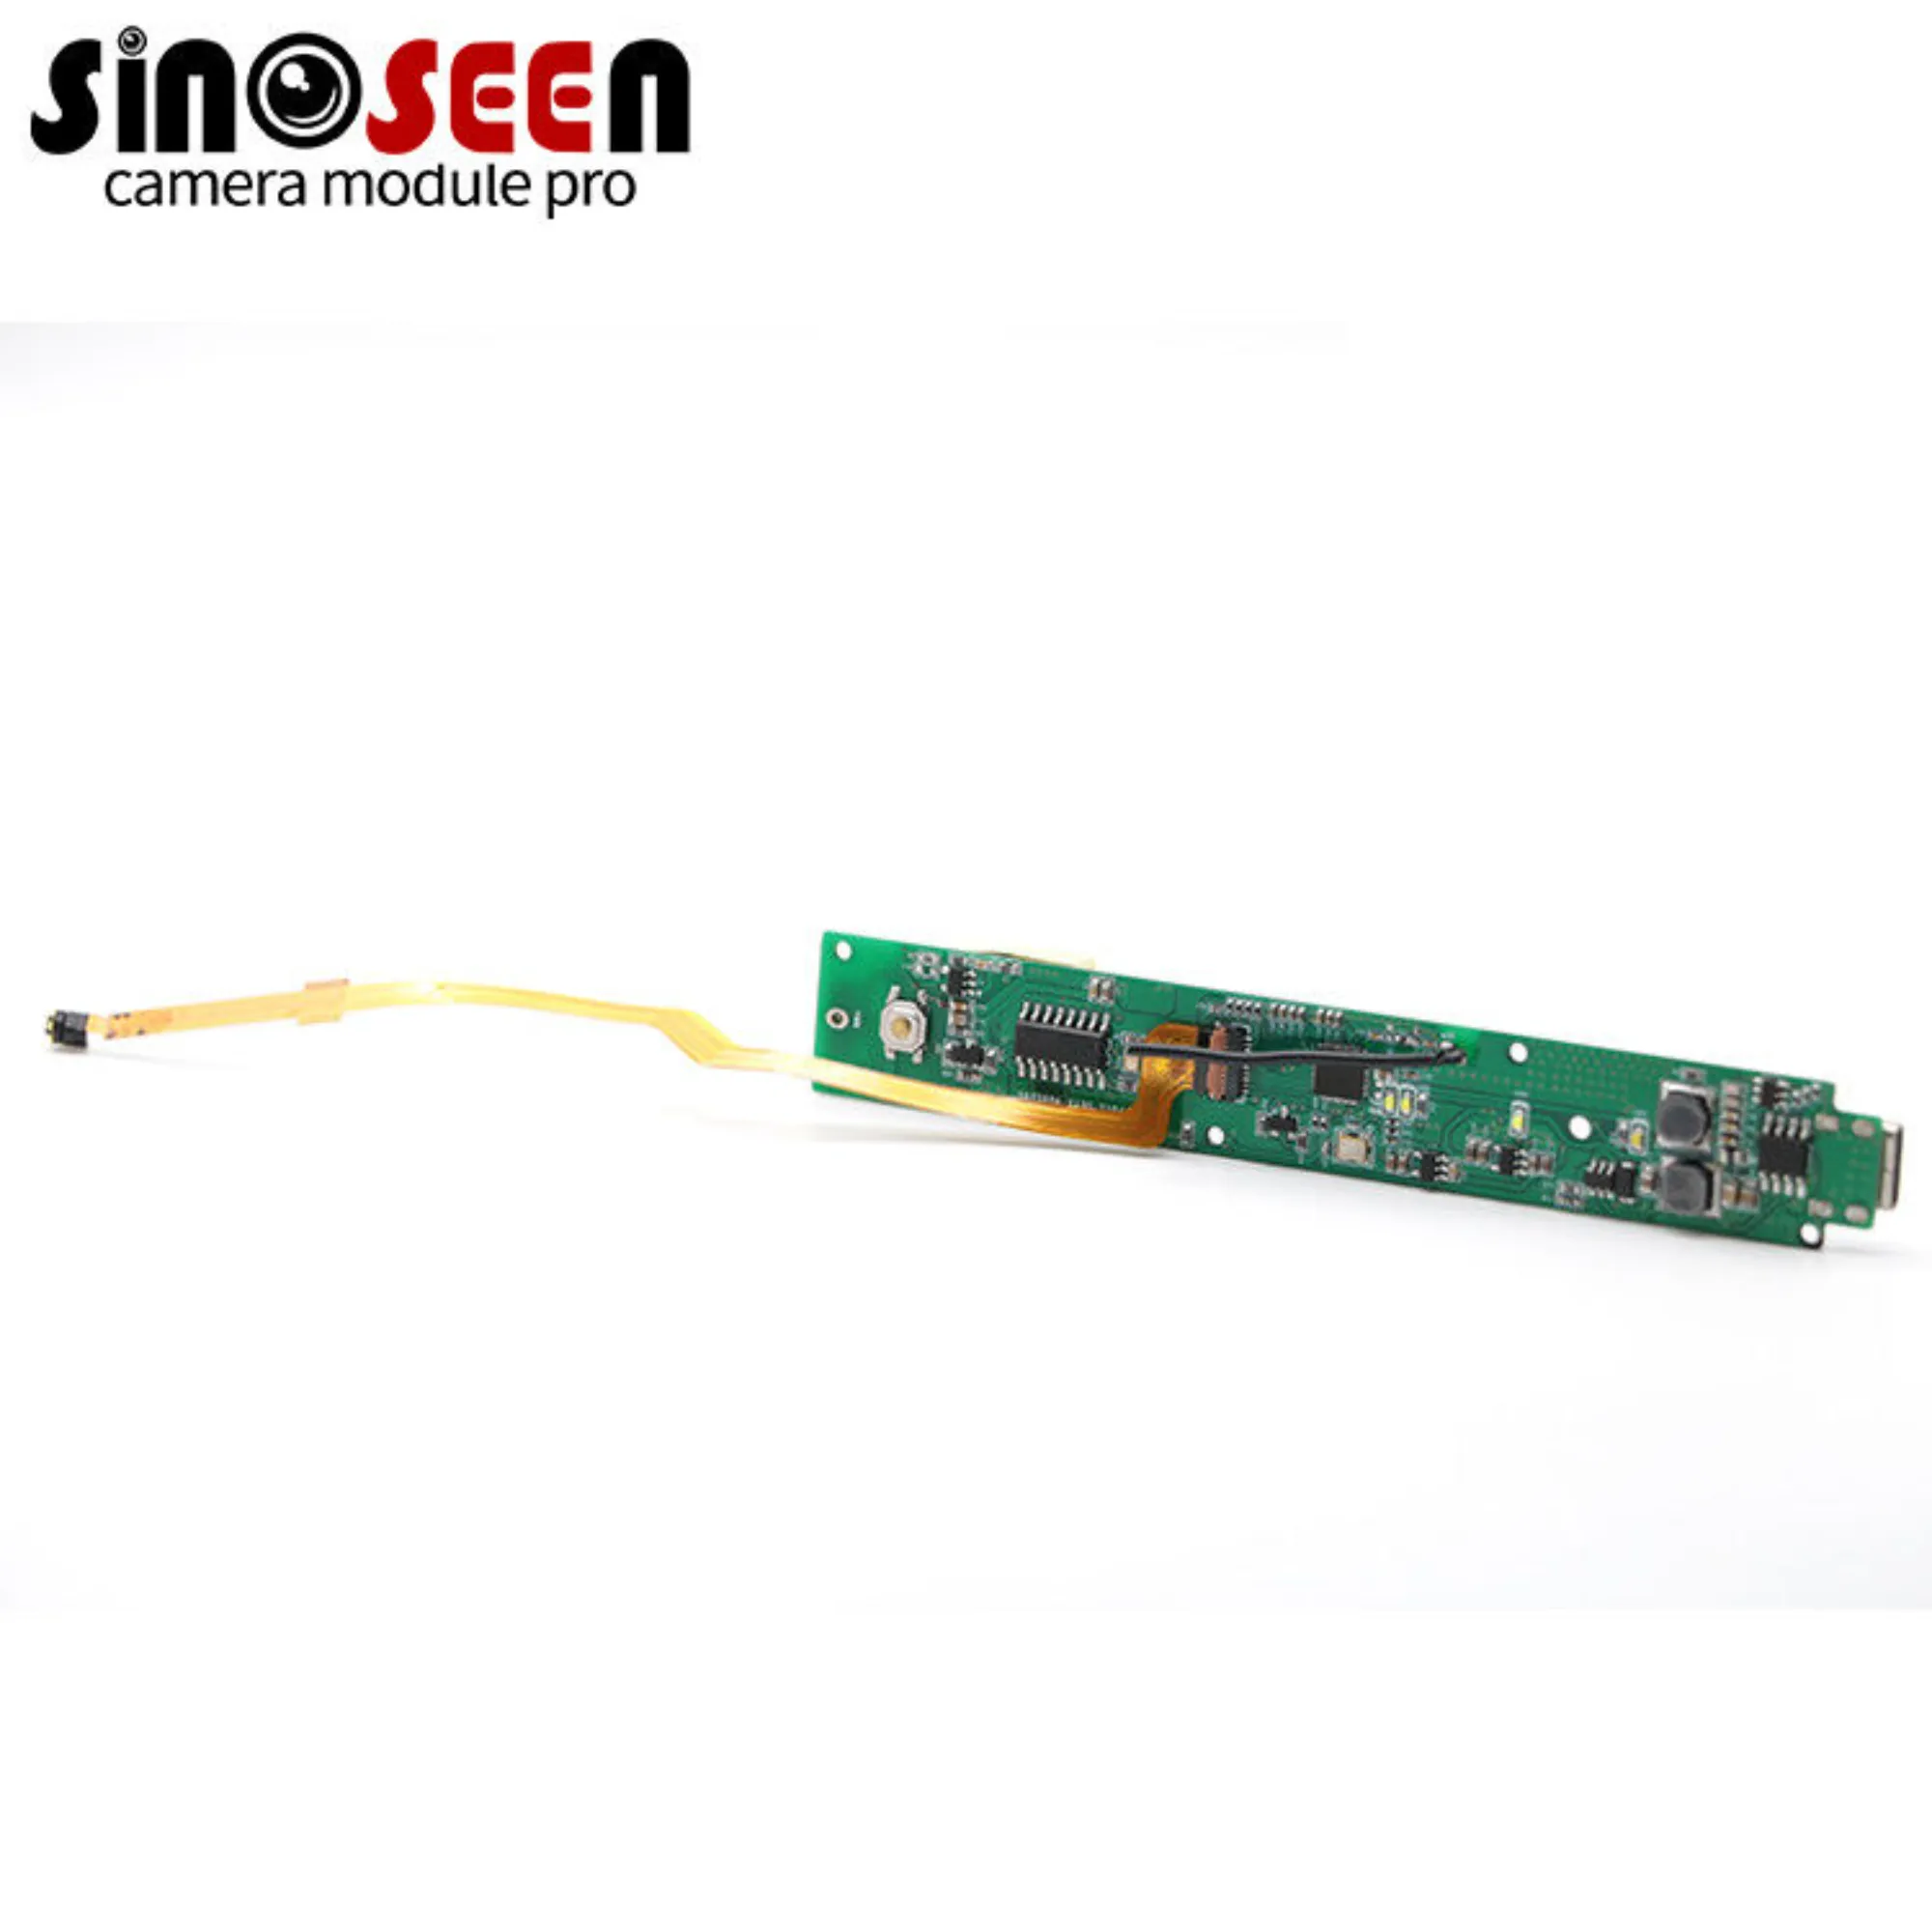 OEM Camera Modules 30FPS Fixed Focus Endoscopic With Mainboard